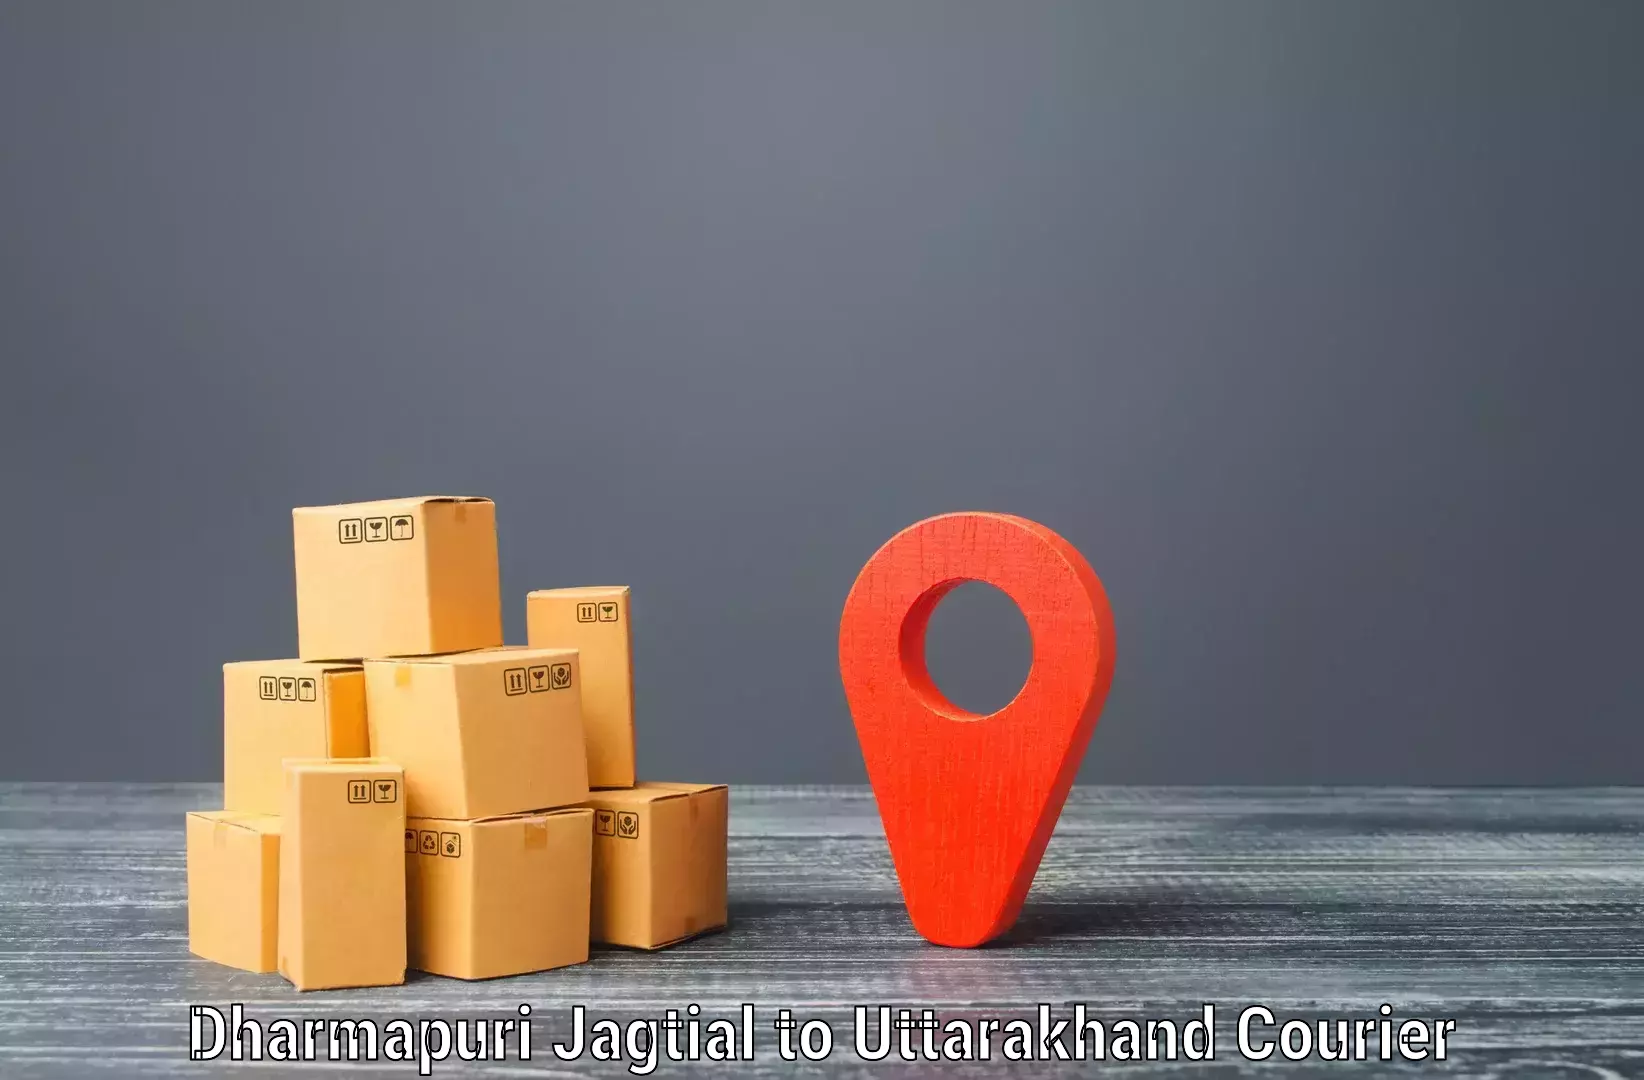 24/7 shipping services Dharmapuri Jagtial to Mussoorie